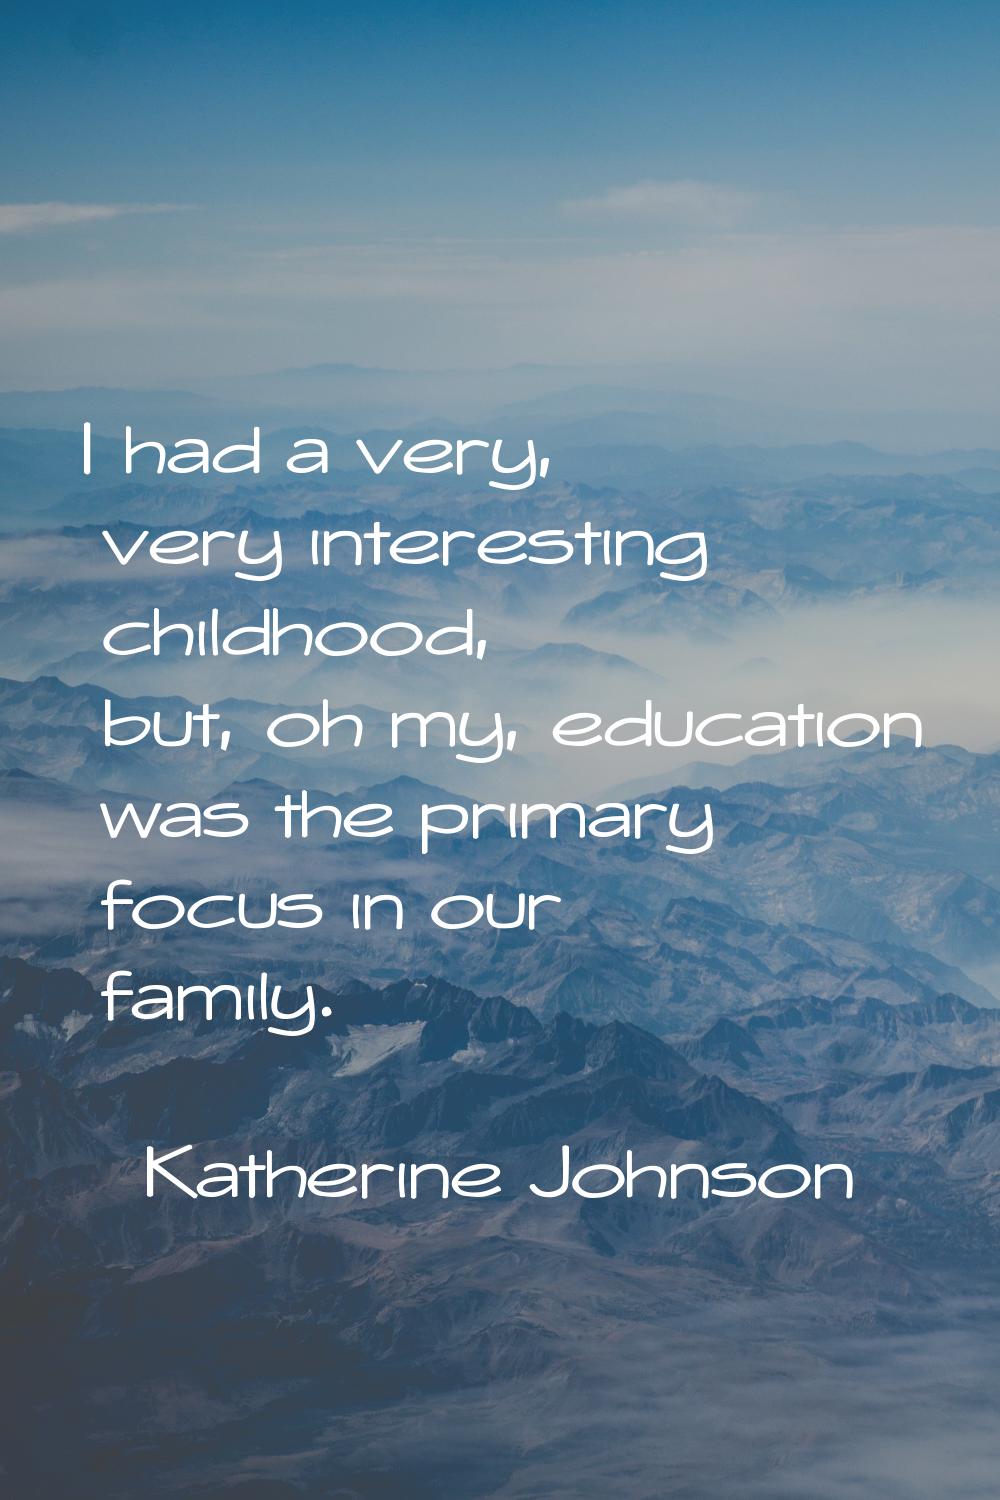 I had a very, very interesting childhood, but, oh my, education was the primary focus in our family